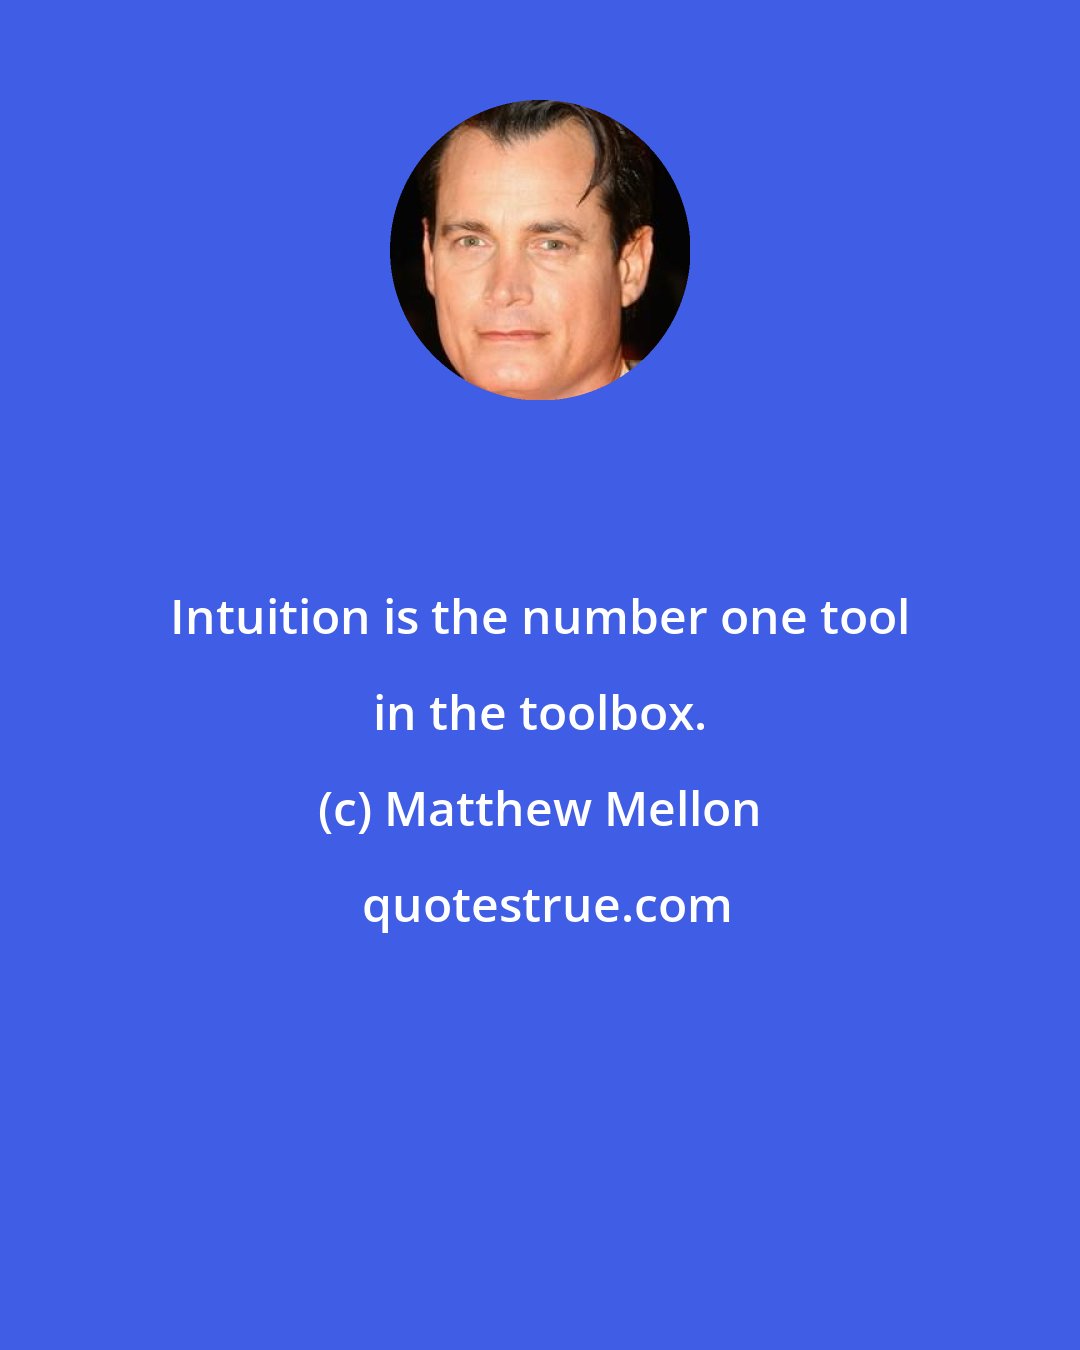 Matthew Mellon: Intuition is the number one tool in the toolbox.